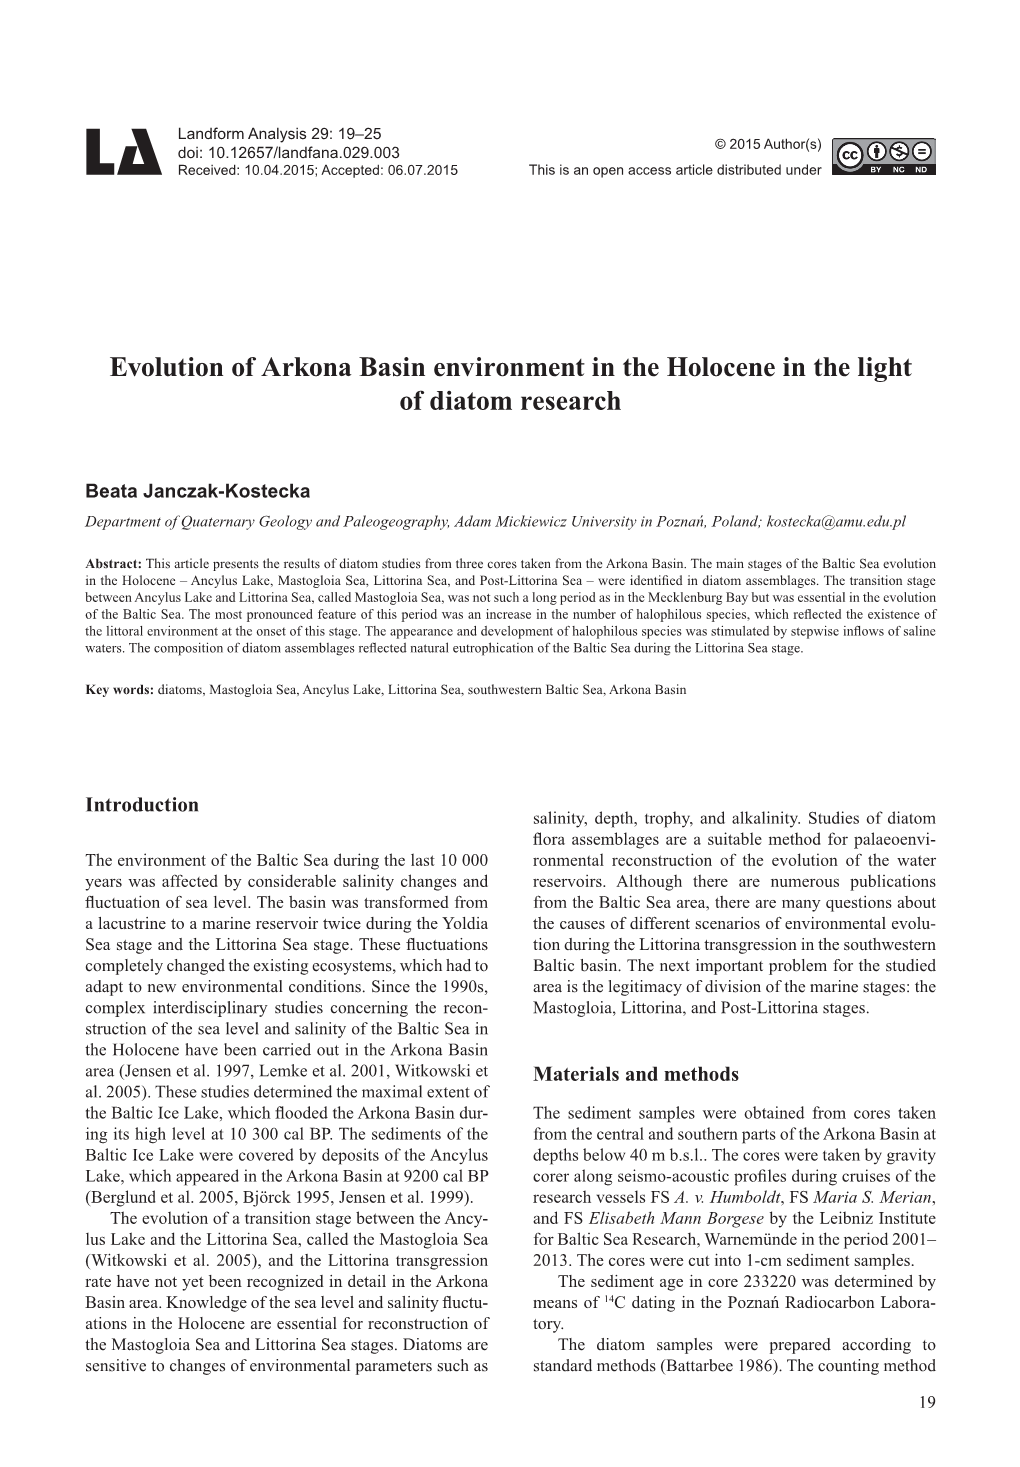 Evolution of Arkona Basin Environment in the Holocene in the Light of Diatom Research